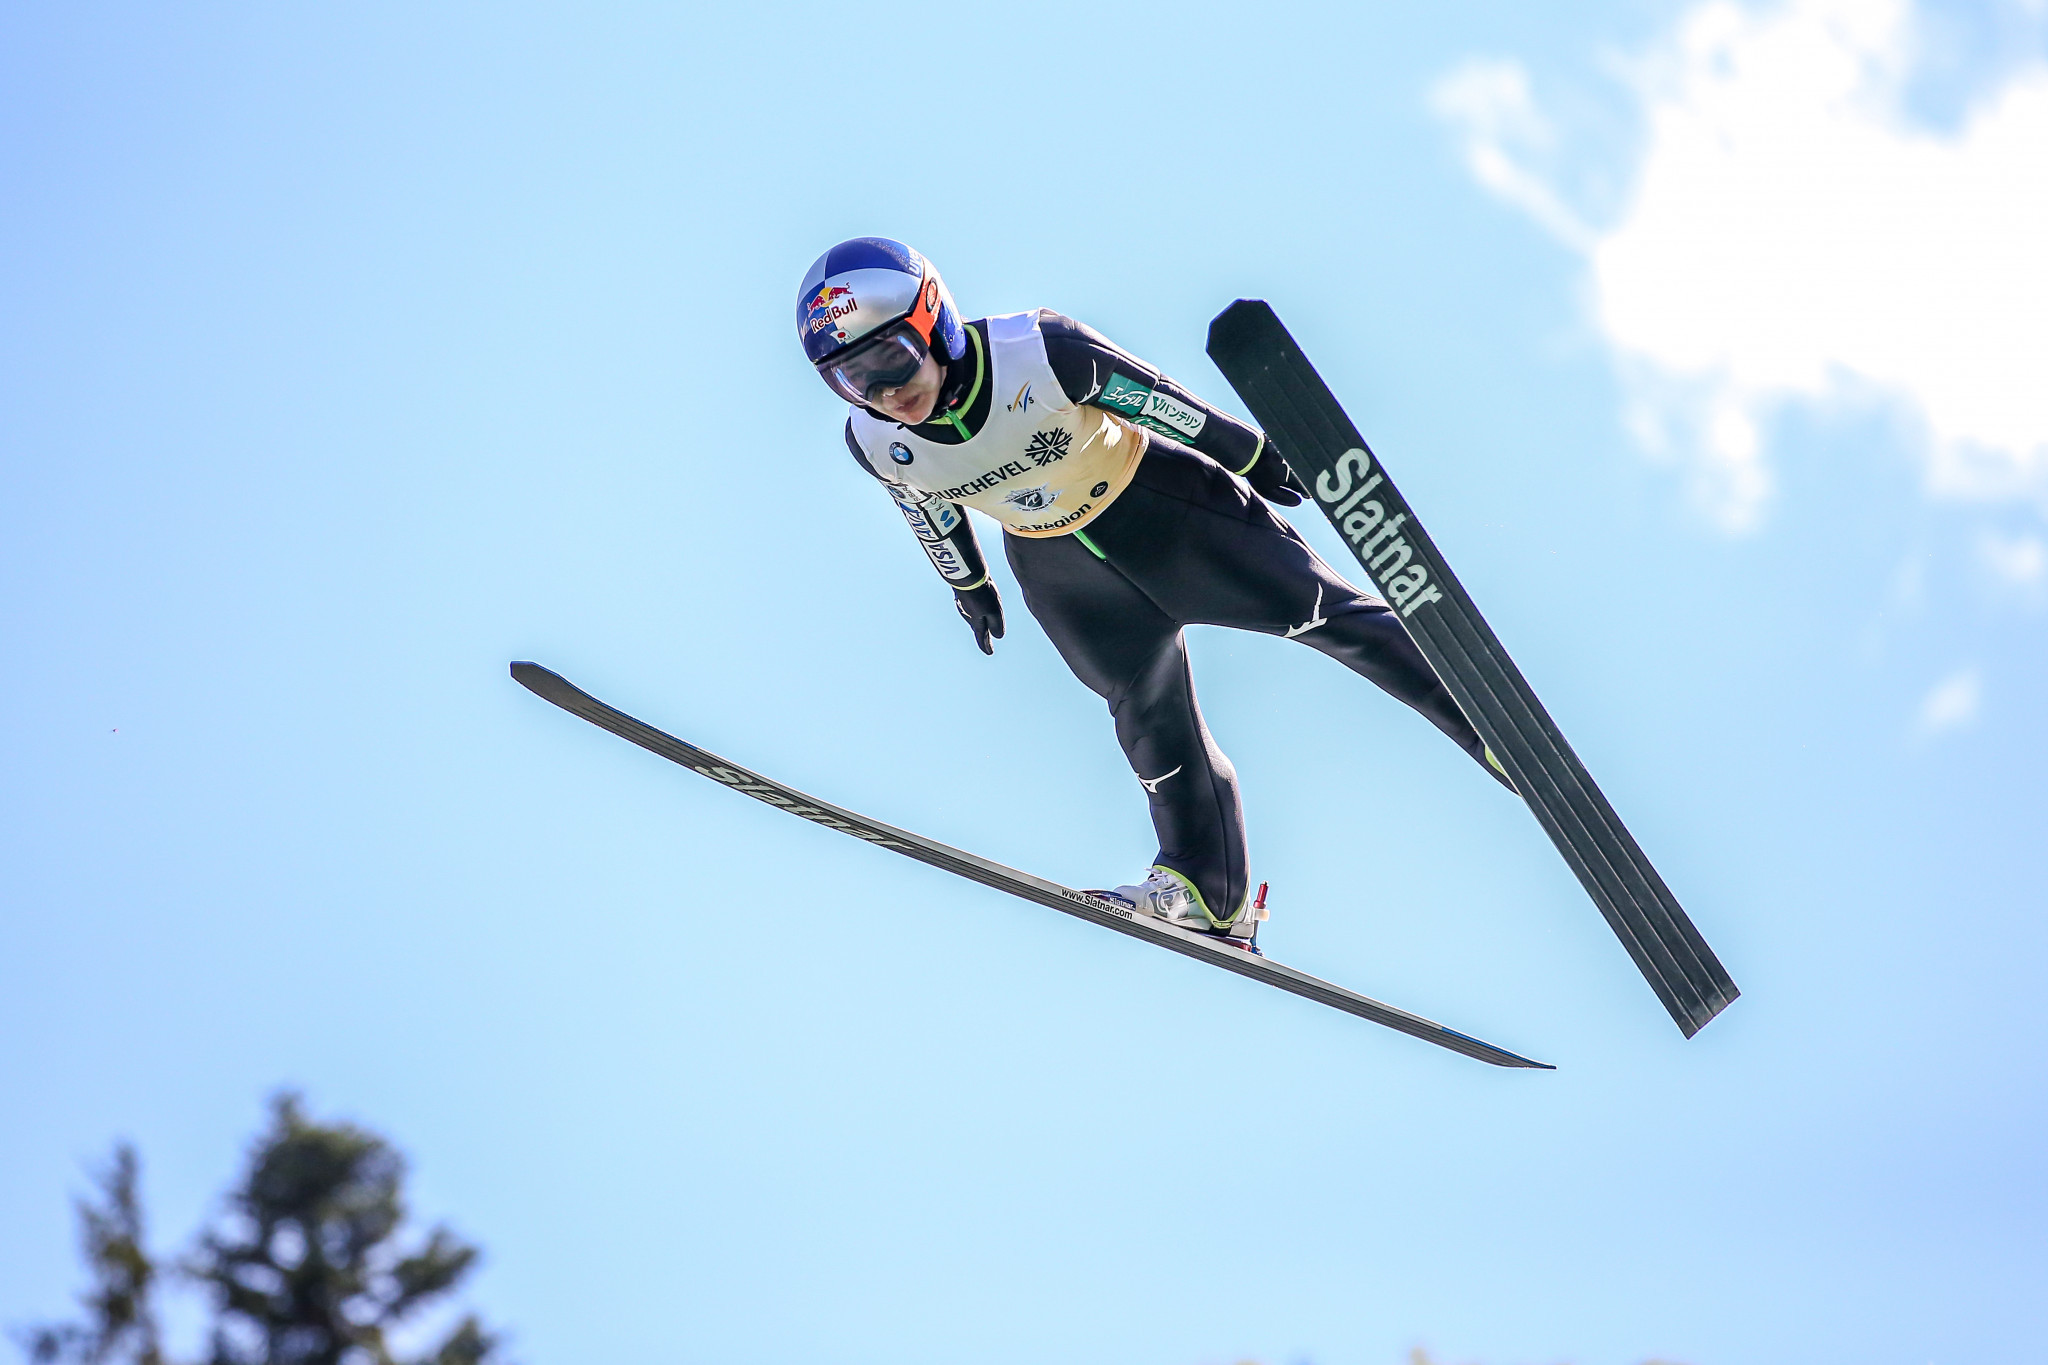 New study looks into injuries in women's ski jumping